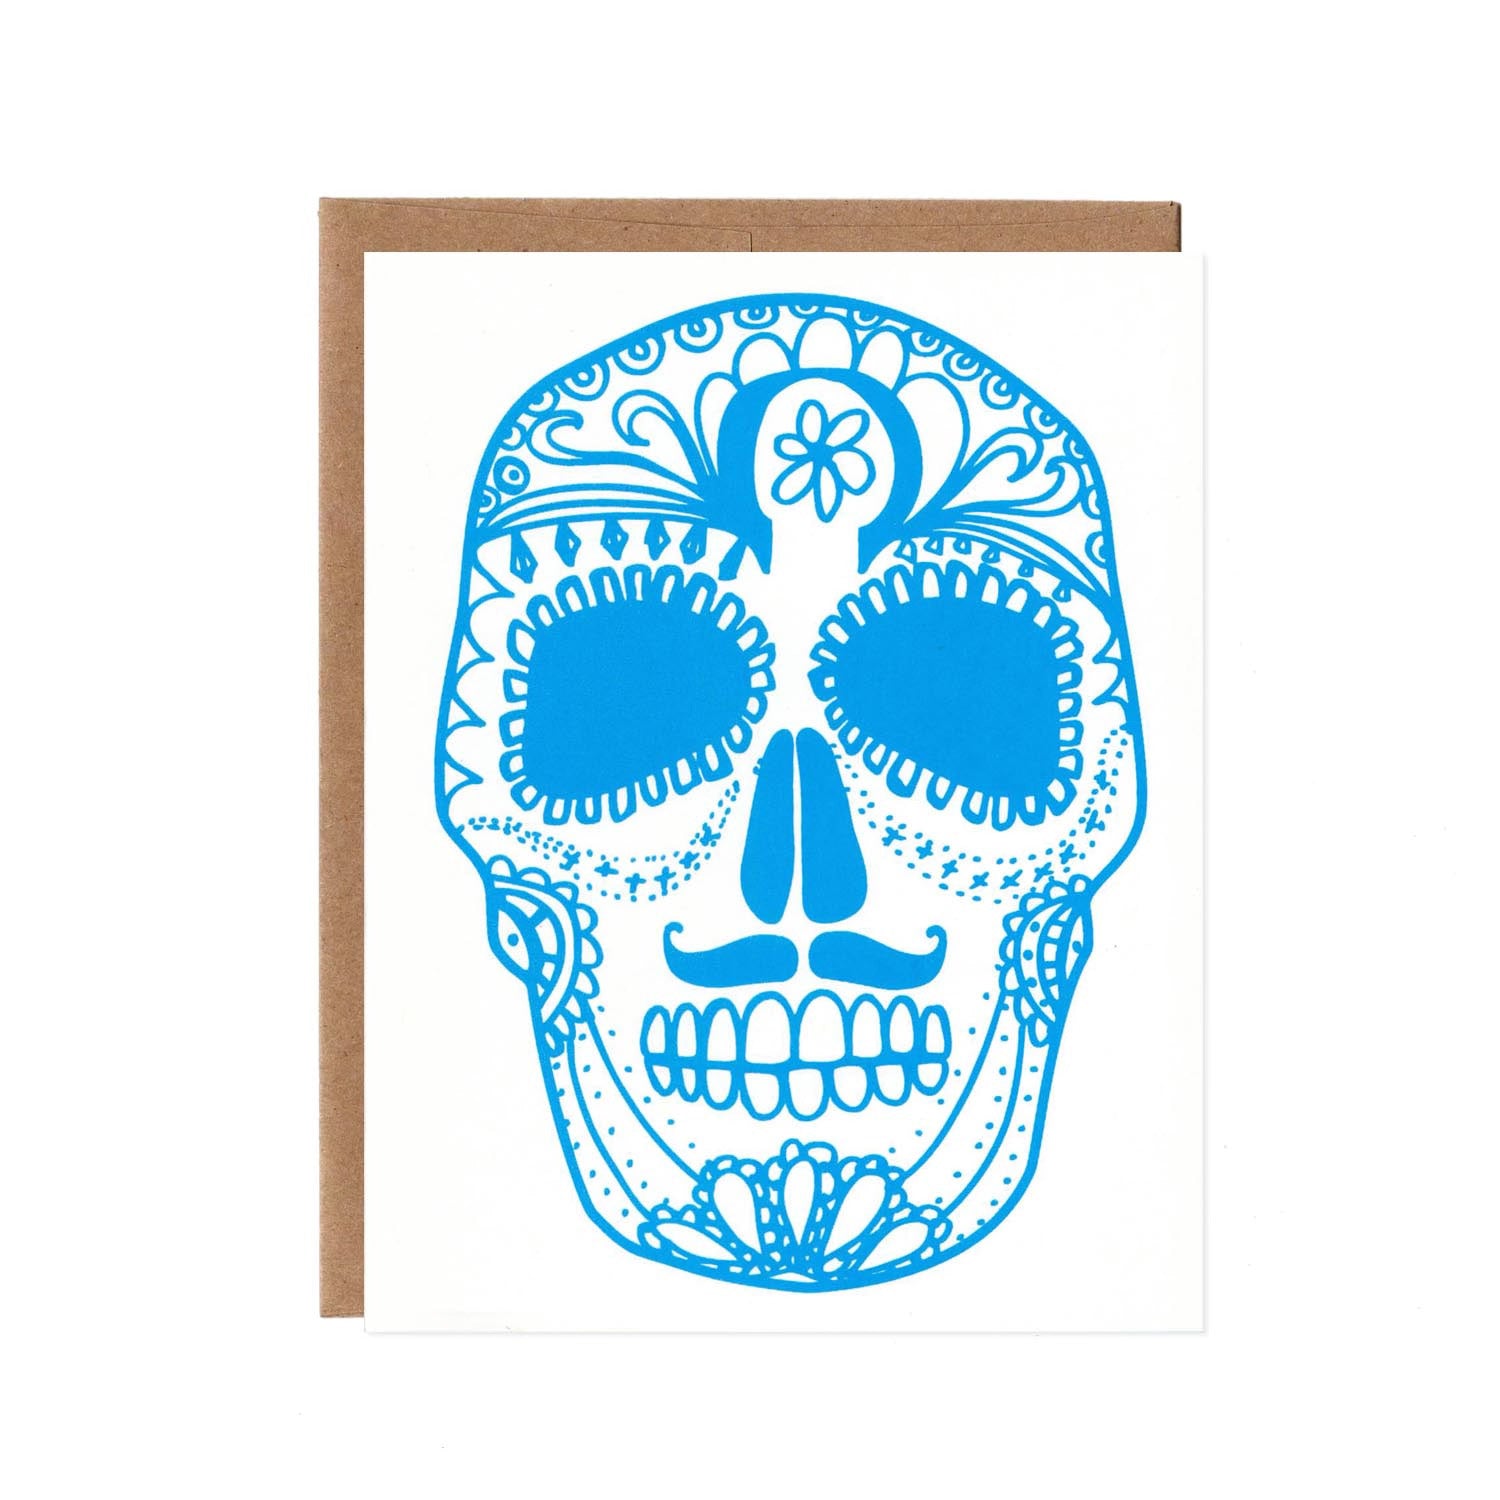 Blue sugar skull Image on a white greeting card